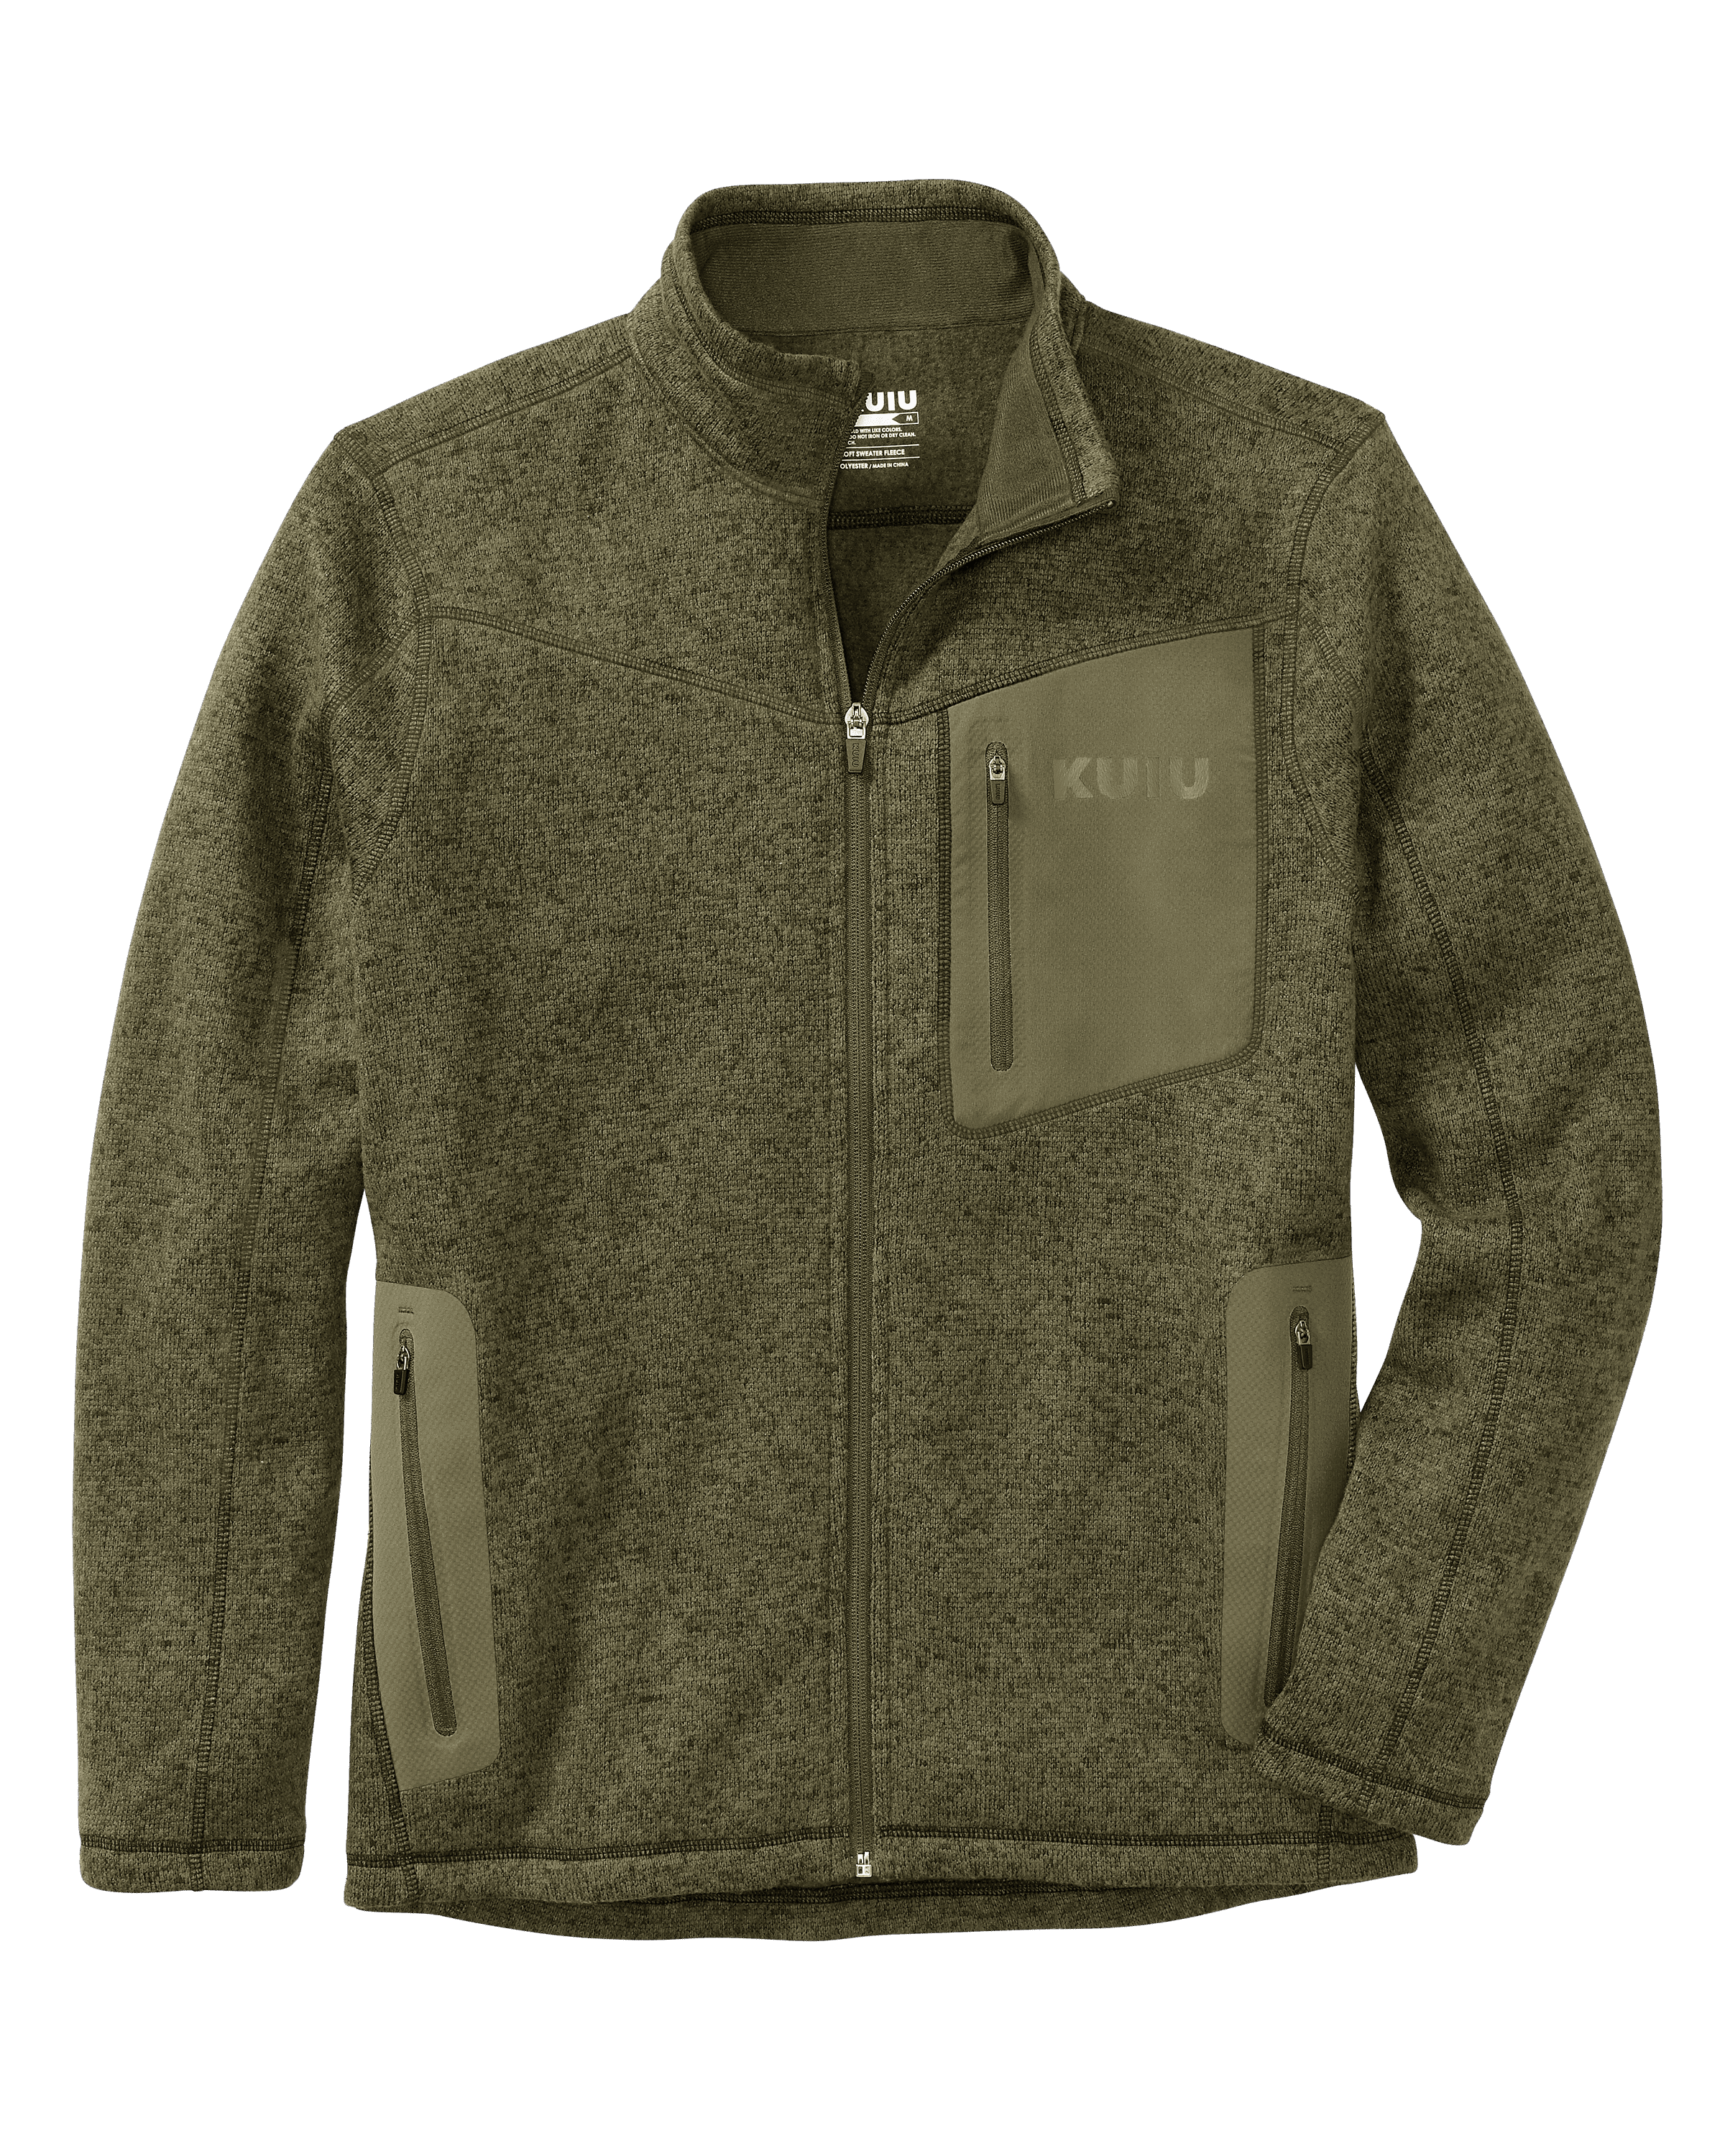 KUIU Outlet Base Camp Full Zip Sweater in Olive | Size 2XL